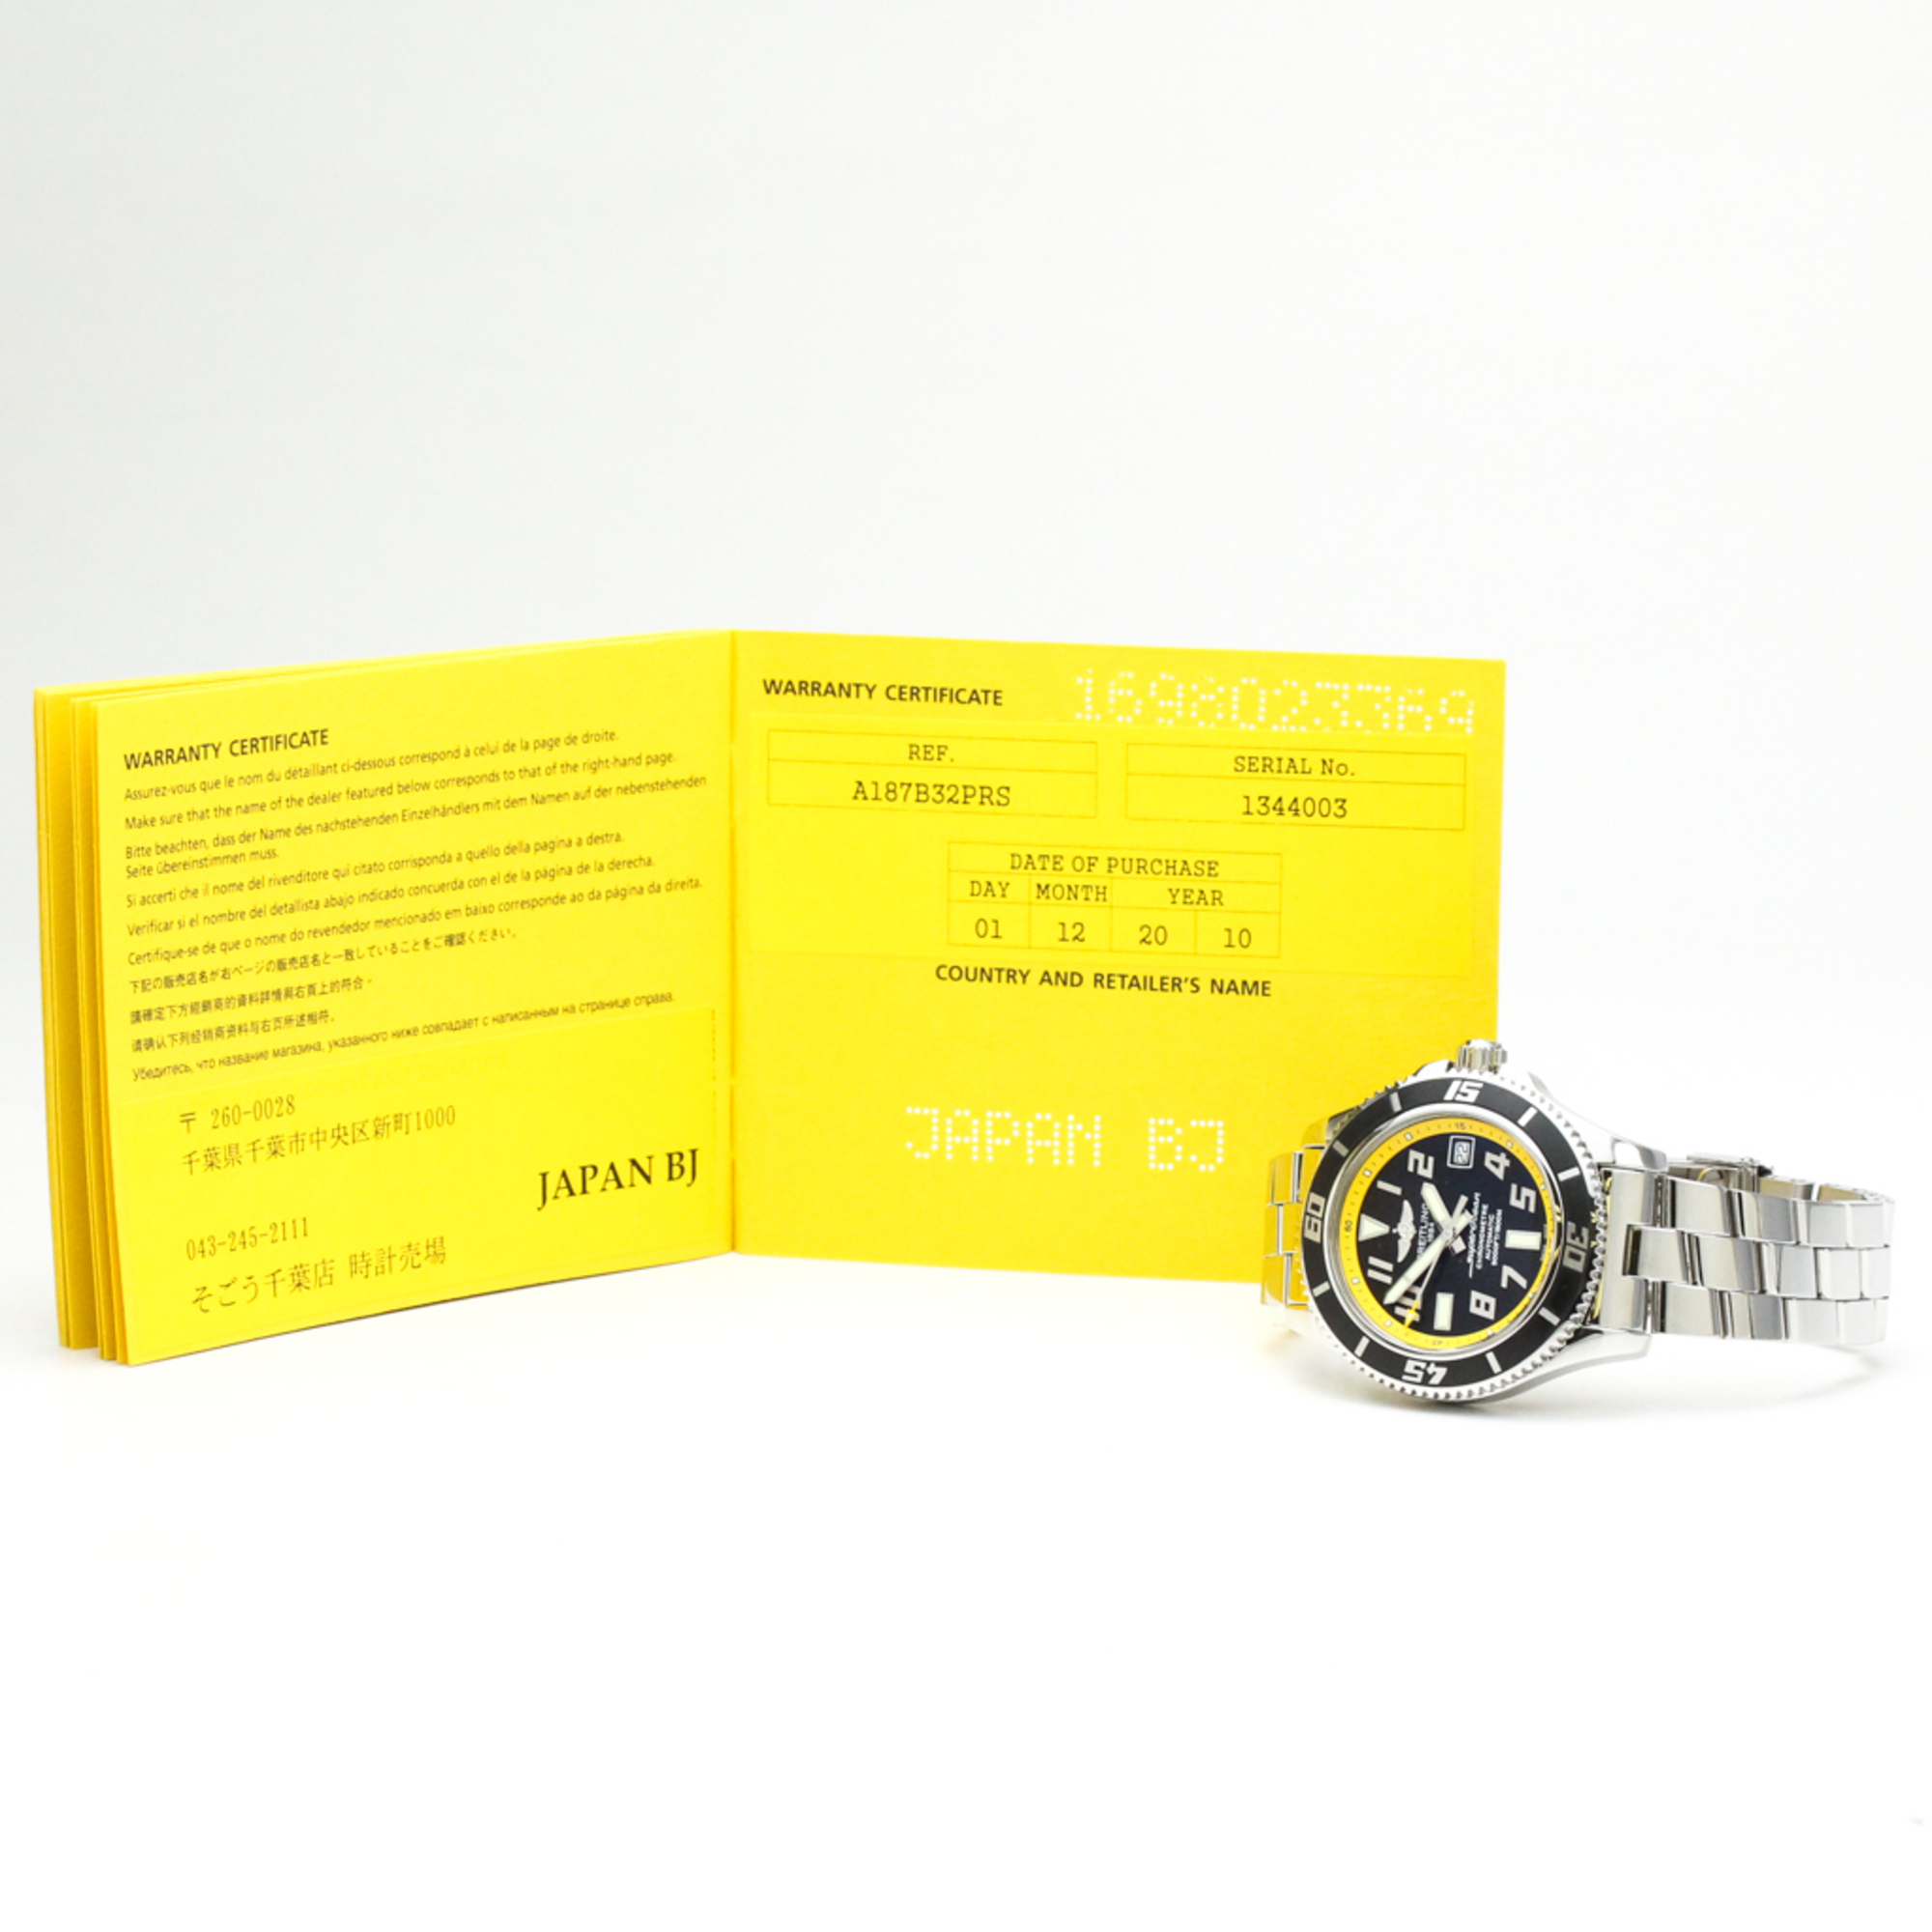 BREITLING SuperOcean 42 Steel Automatic Mens Watch A17364